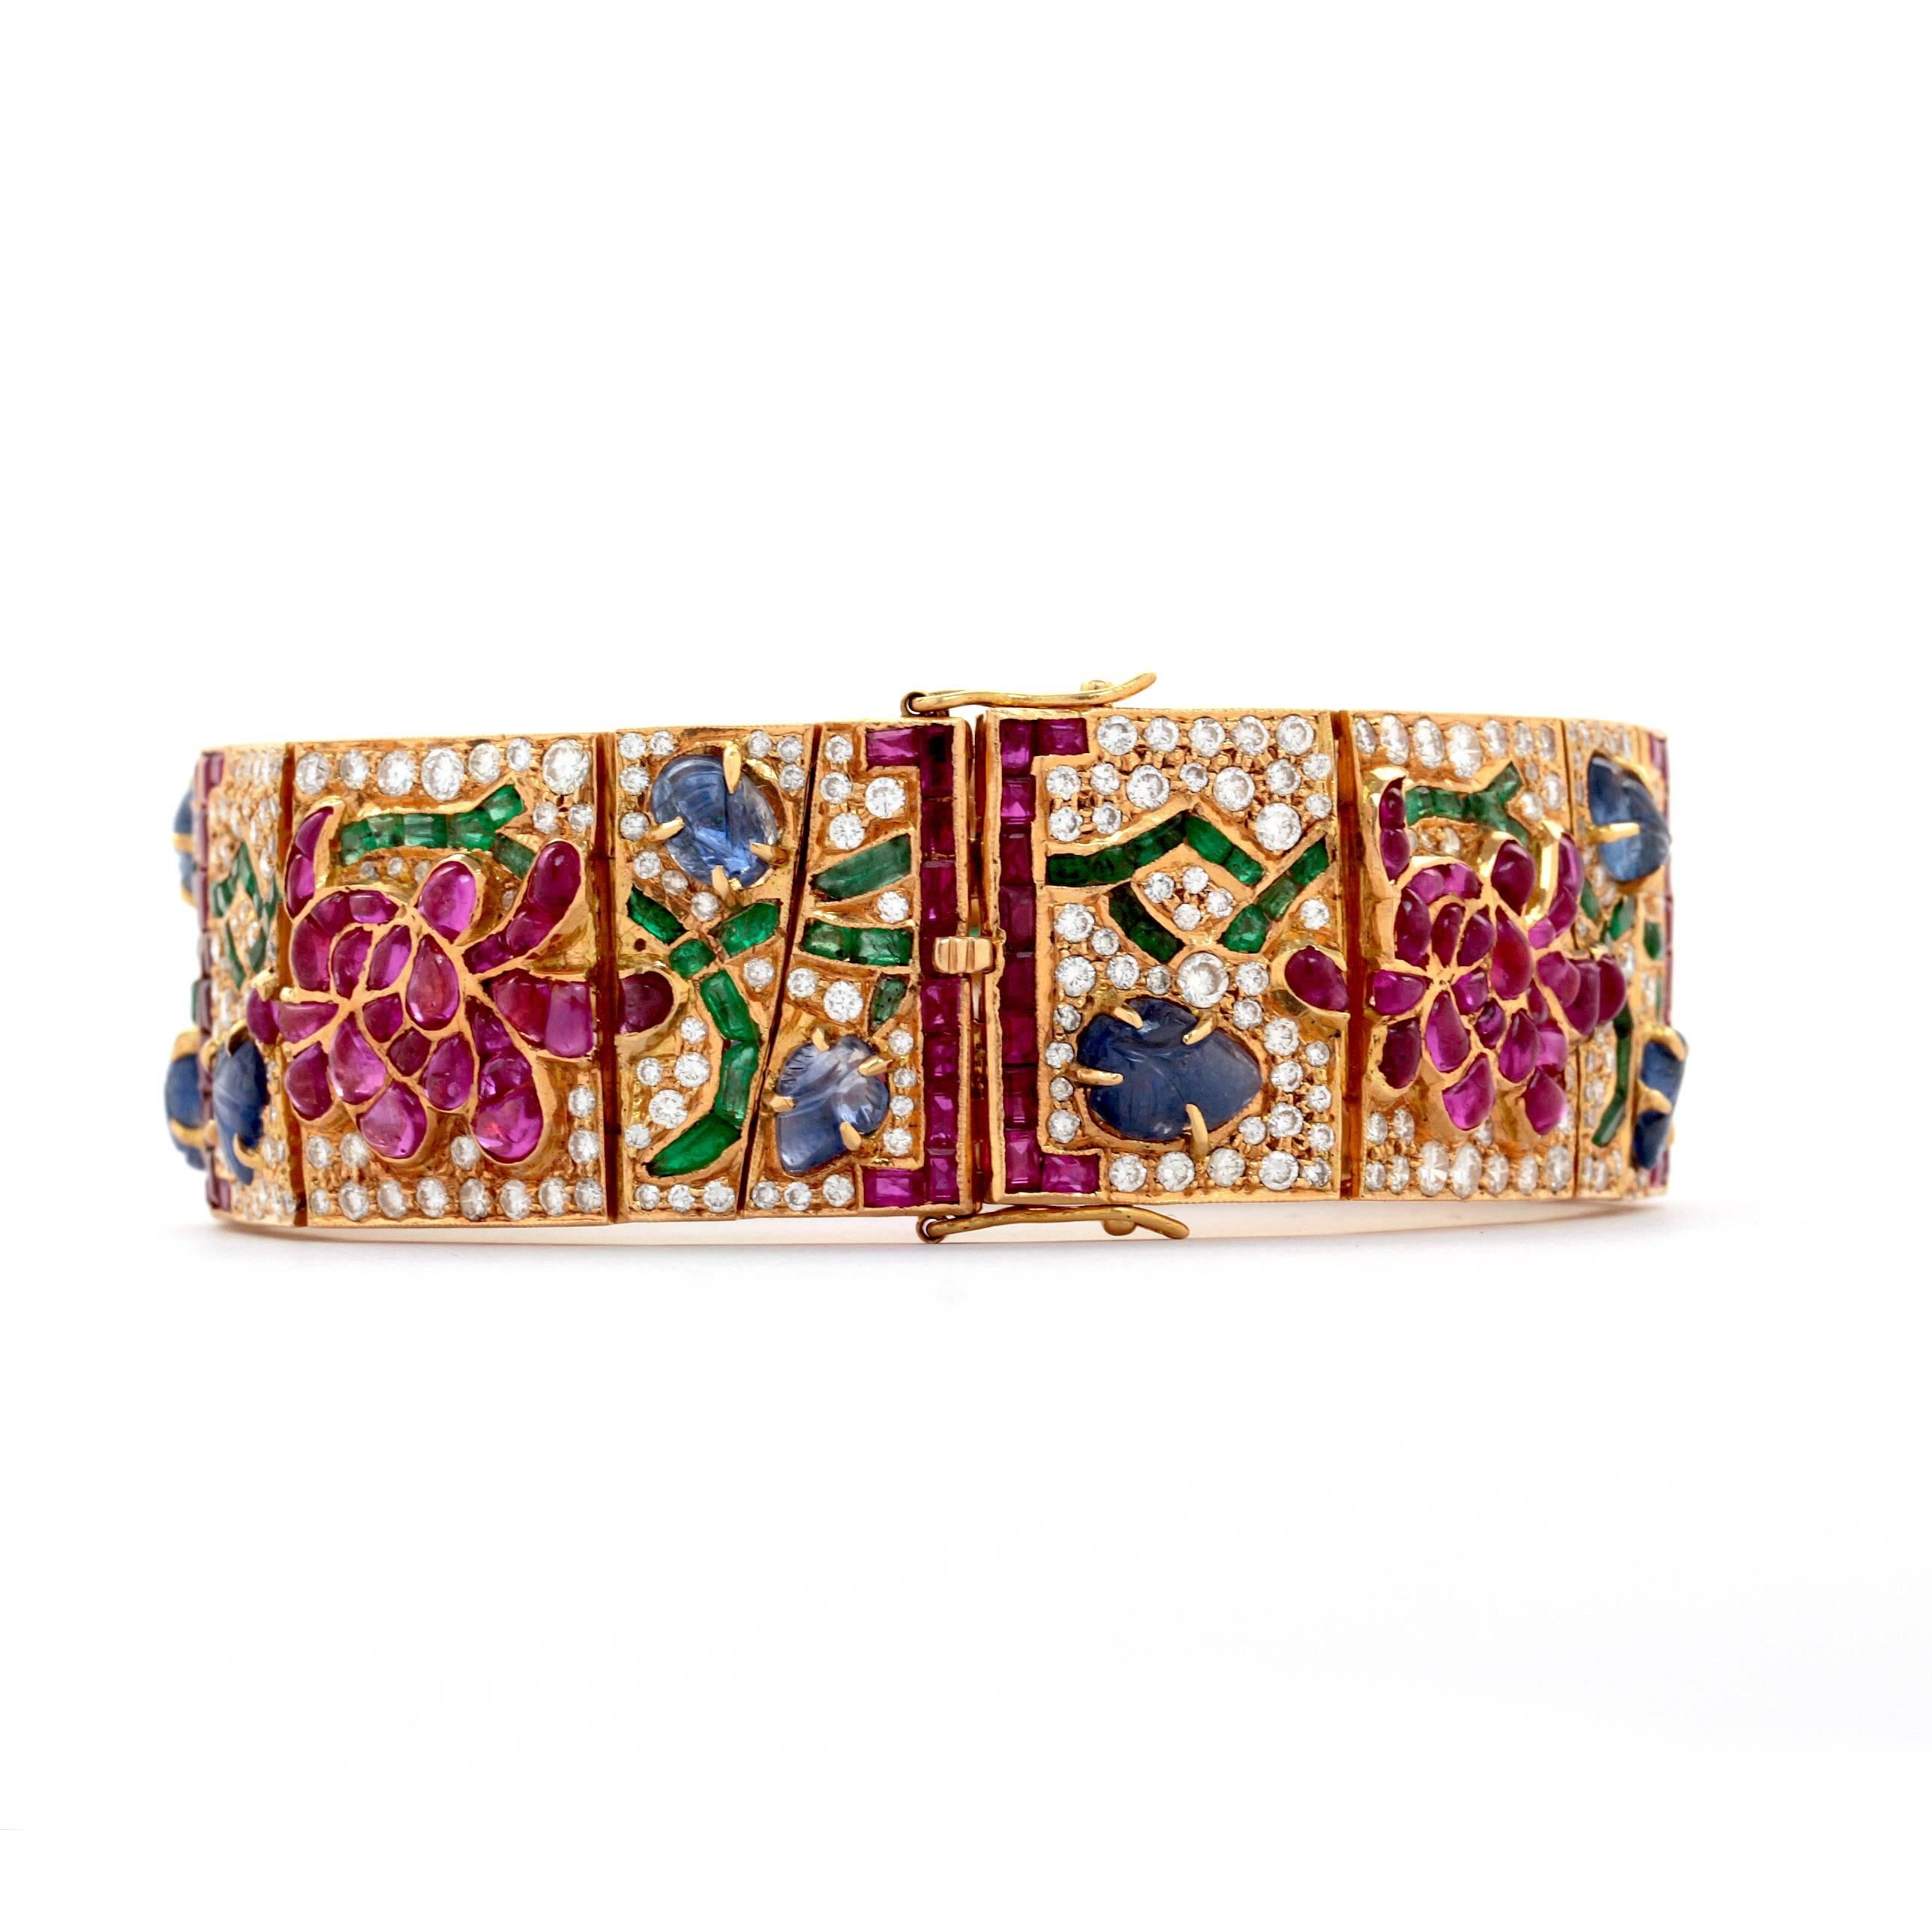 Mutli Gem Yellow Gold Bracelet with Diamonds, and Sapphires in a Flower design. For Sale 2